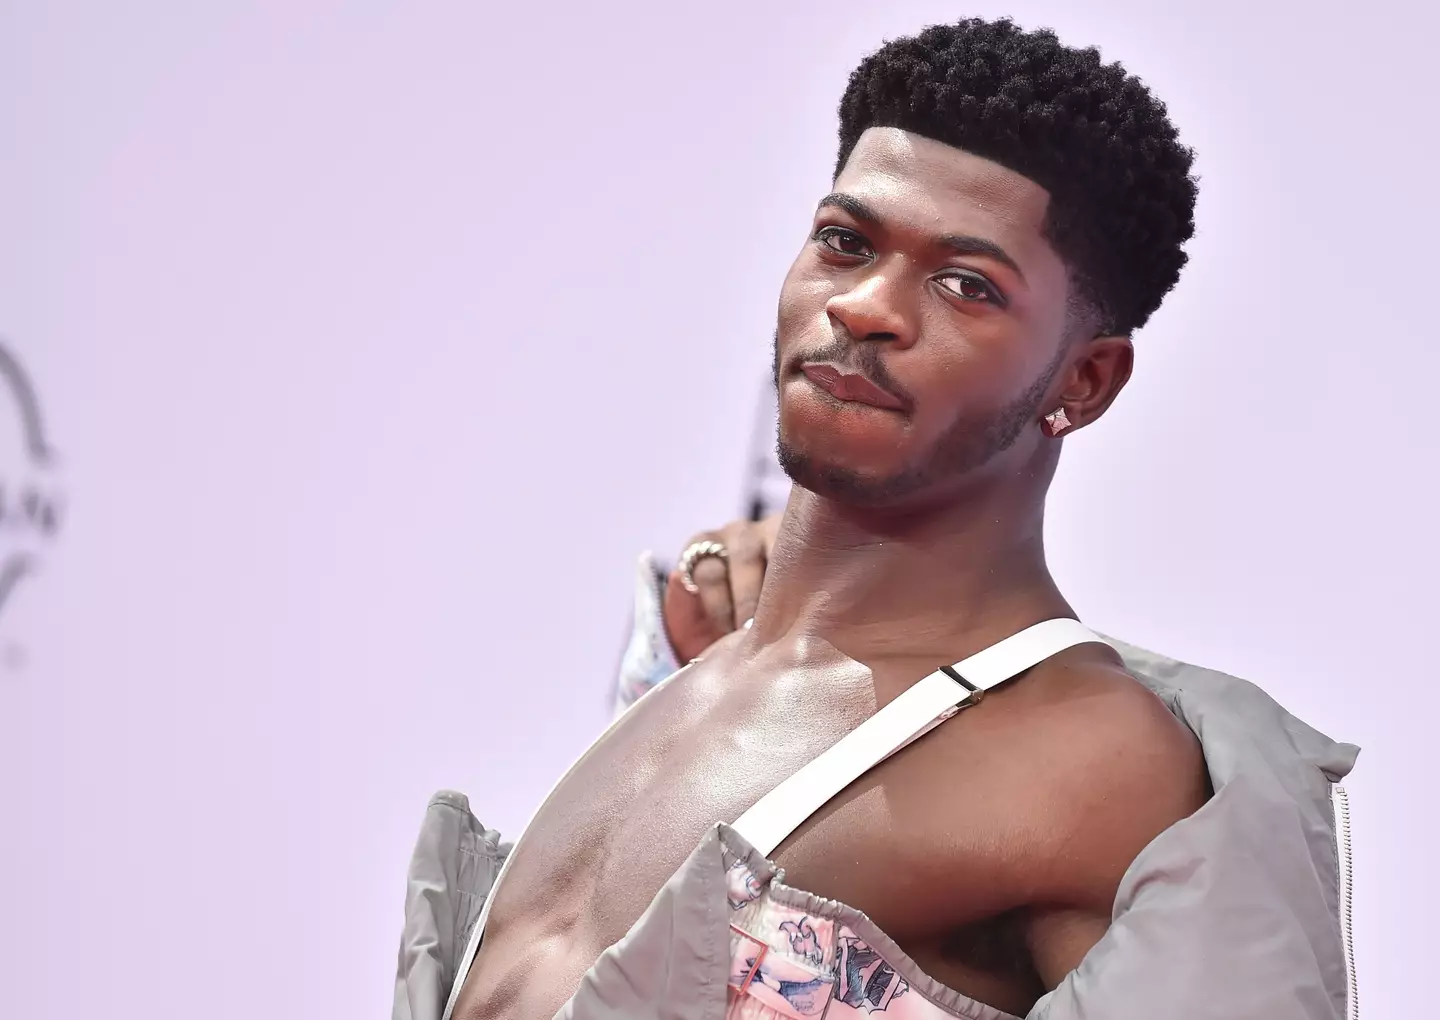 Lil Nas X has urinated on the BET award he won in 2019 for Old Town Road.